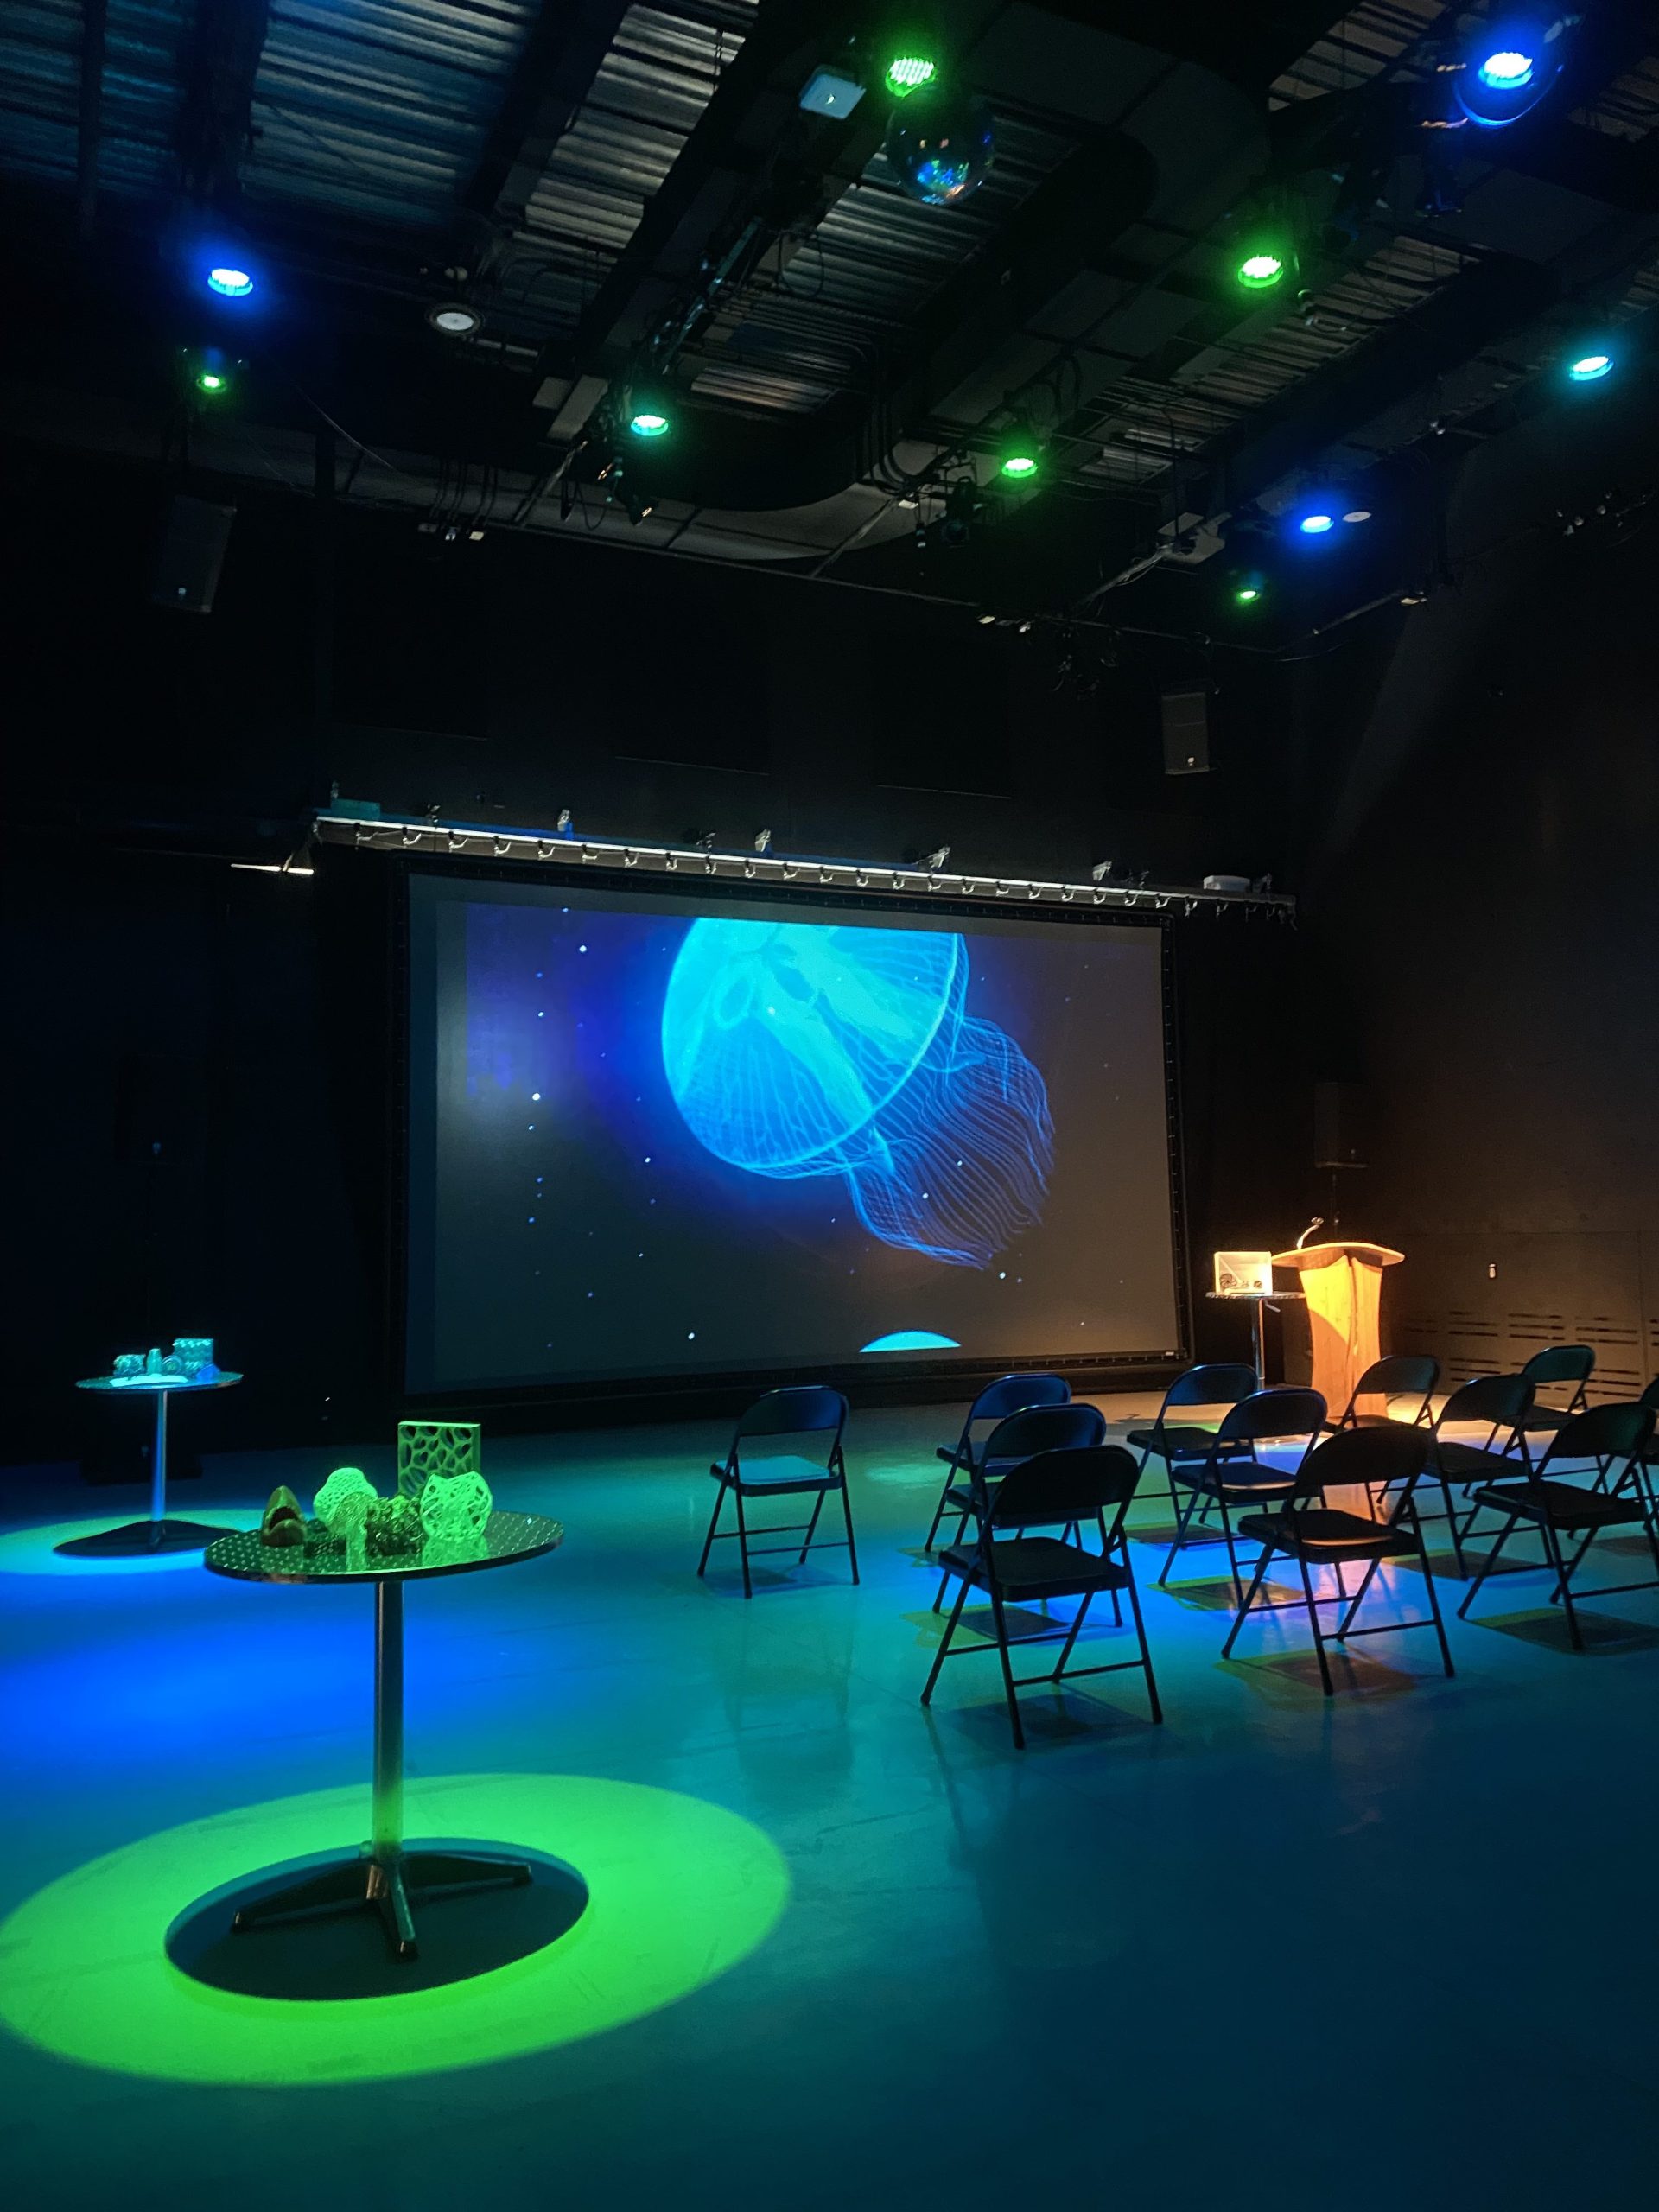 Green and blue theater lights shine on 3D printed objects in the IMRC Center's Adaptive Presentation and Performance Environment. A jellyfish swims on the projection screen.